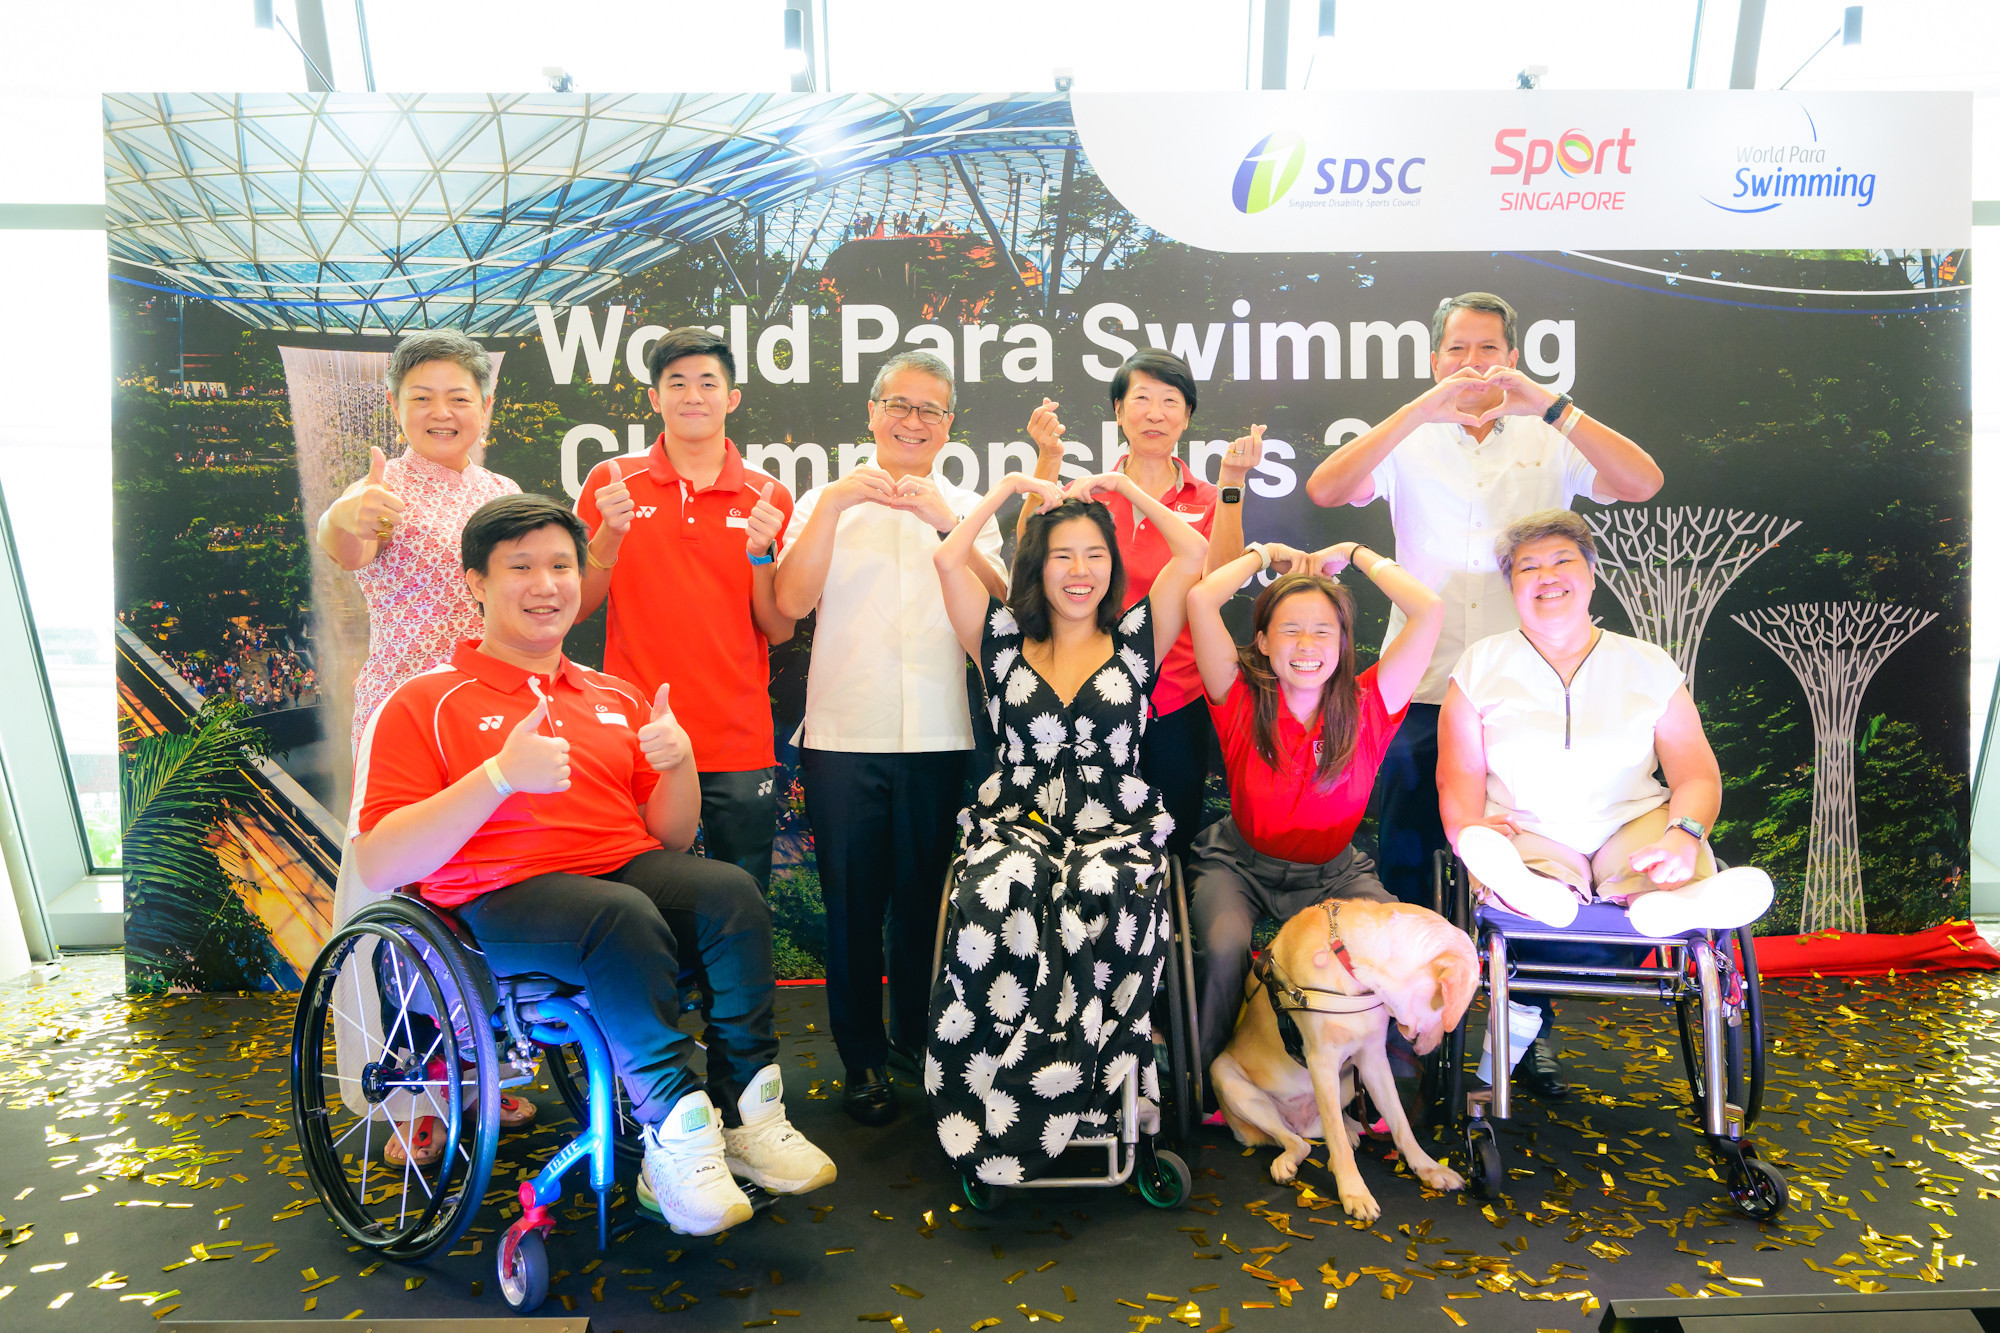 The 12th edition of the World Paralympic Swimming Championships will be held in Singapore from 3-9 October 2025. SDSC